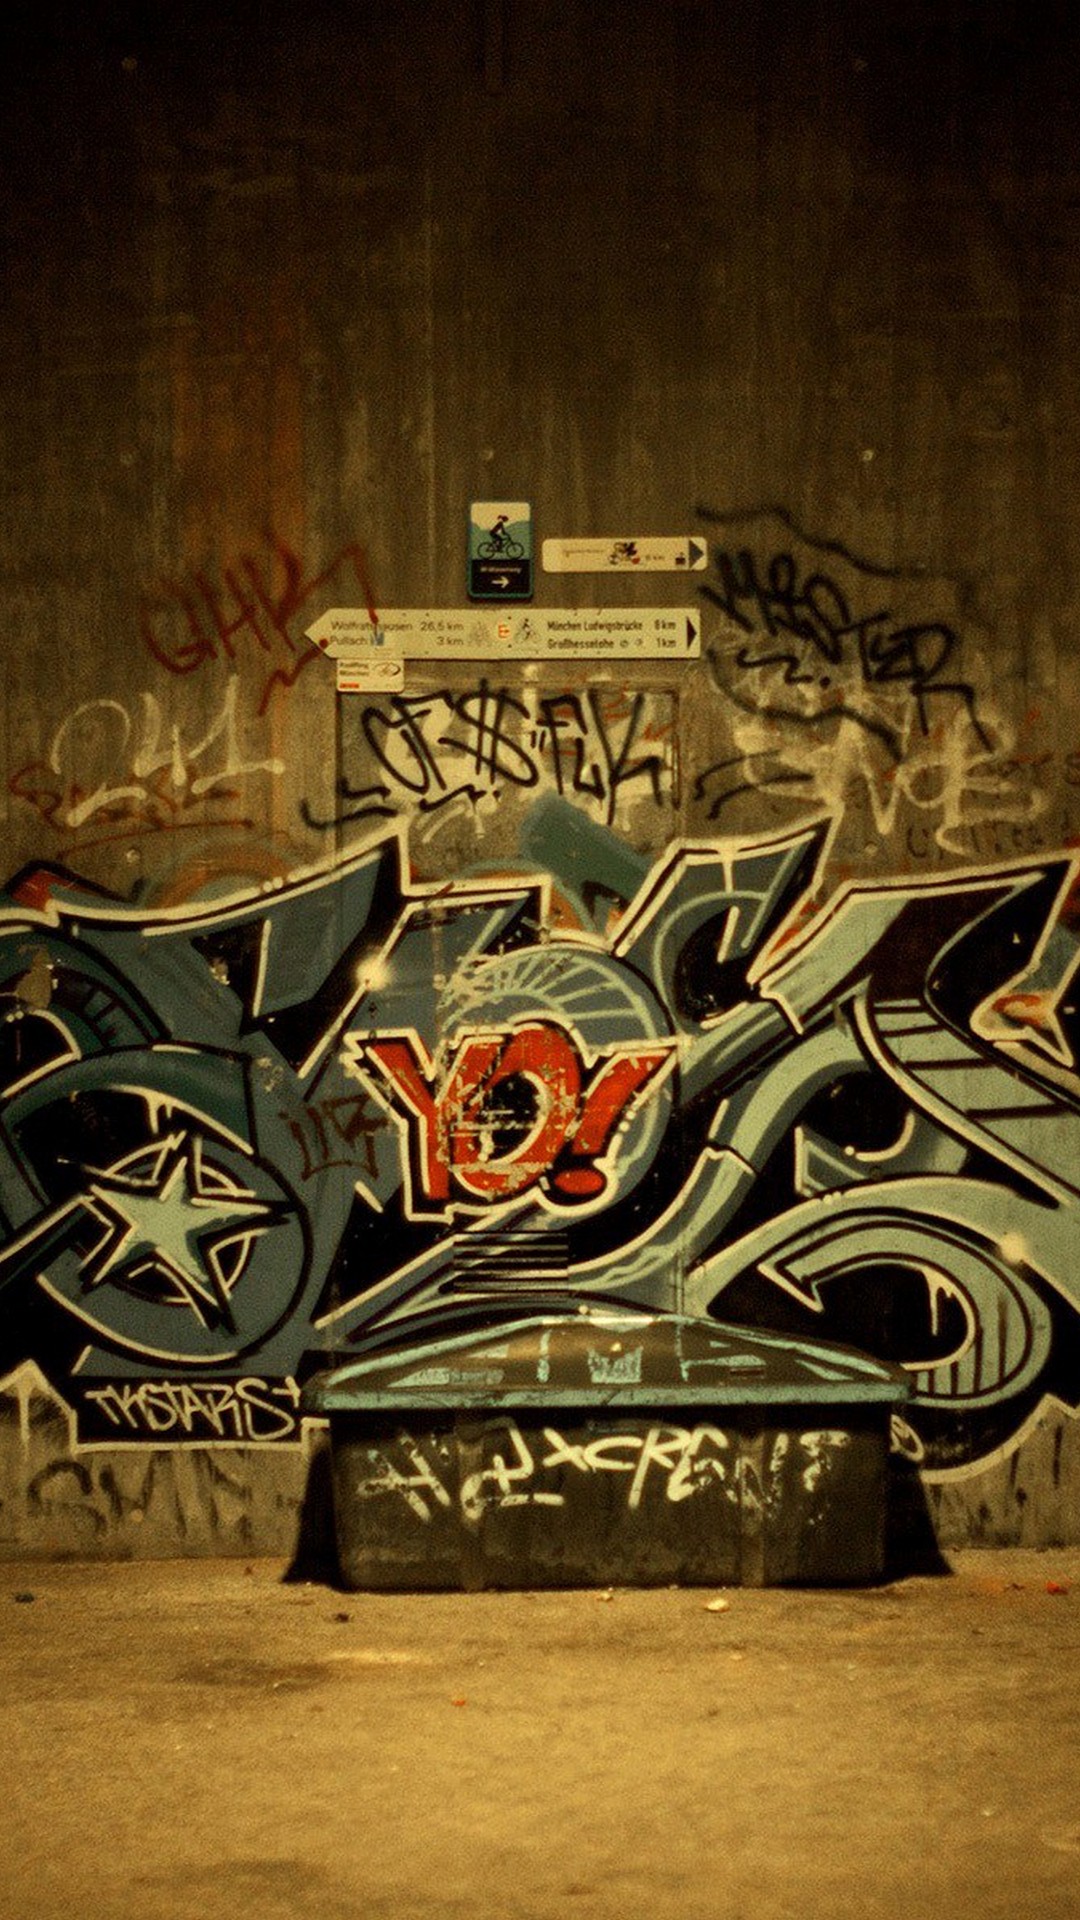 Graffiti Font Wallpaper For iPhone with image resolution 1080x1920 pixel. You can make this wallpaper for your iPhone 5, 6, 7, 8, X backgrounds, Mobile Screensaver, or iPad Lock Screen